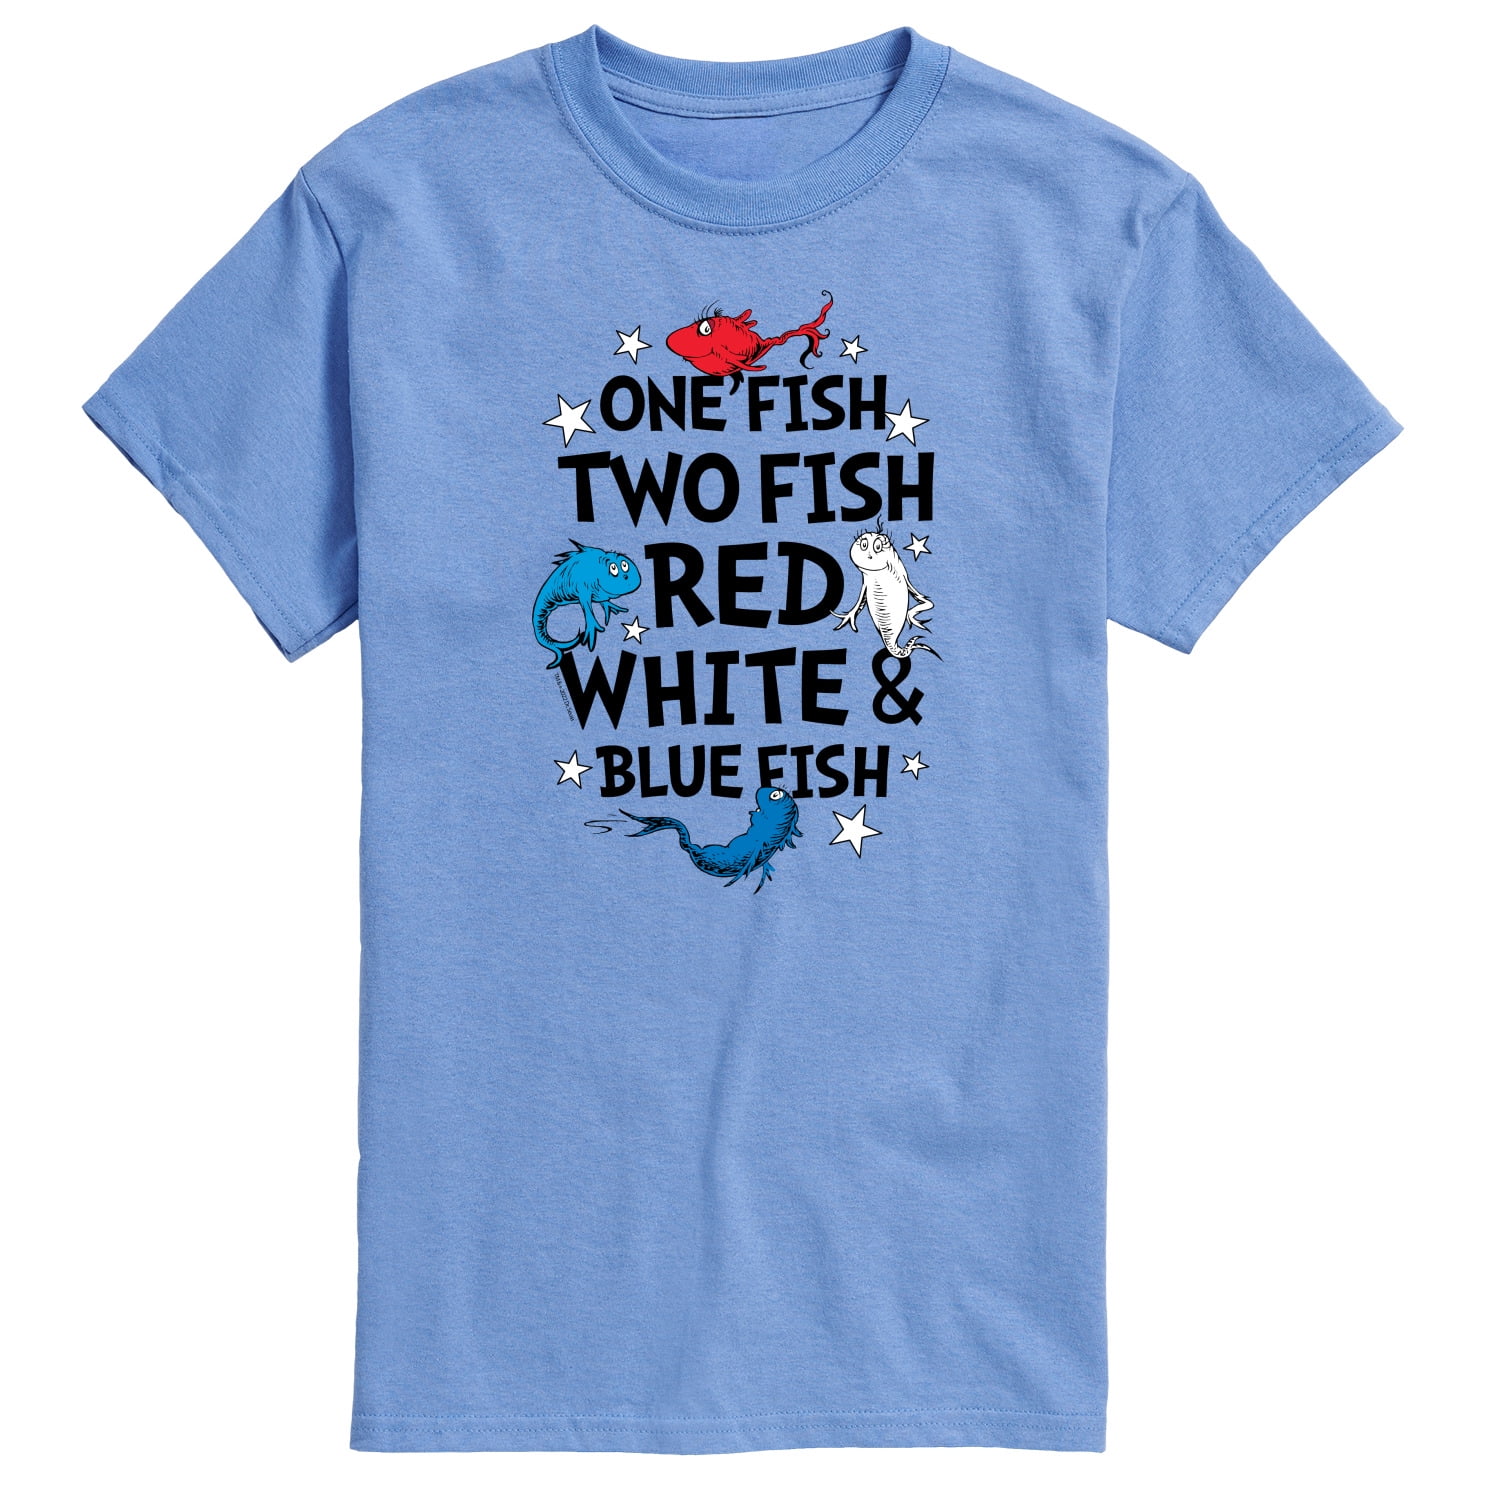 Dr. Seuss - Red, White and Blue Fish - Men's Short Sleeve Graphic T-Shirt